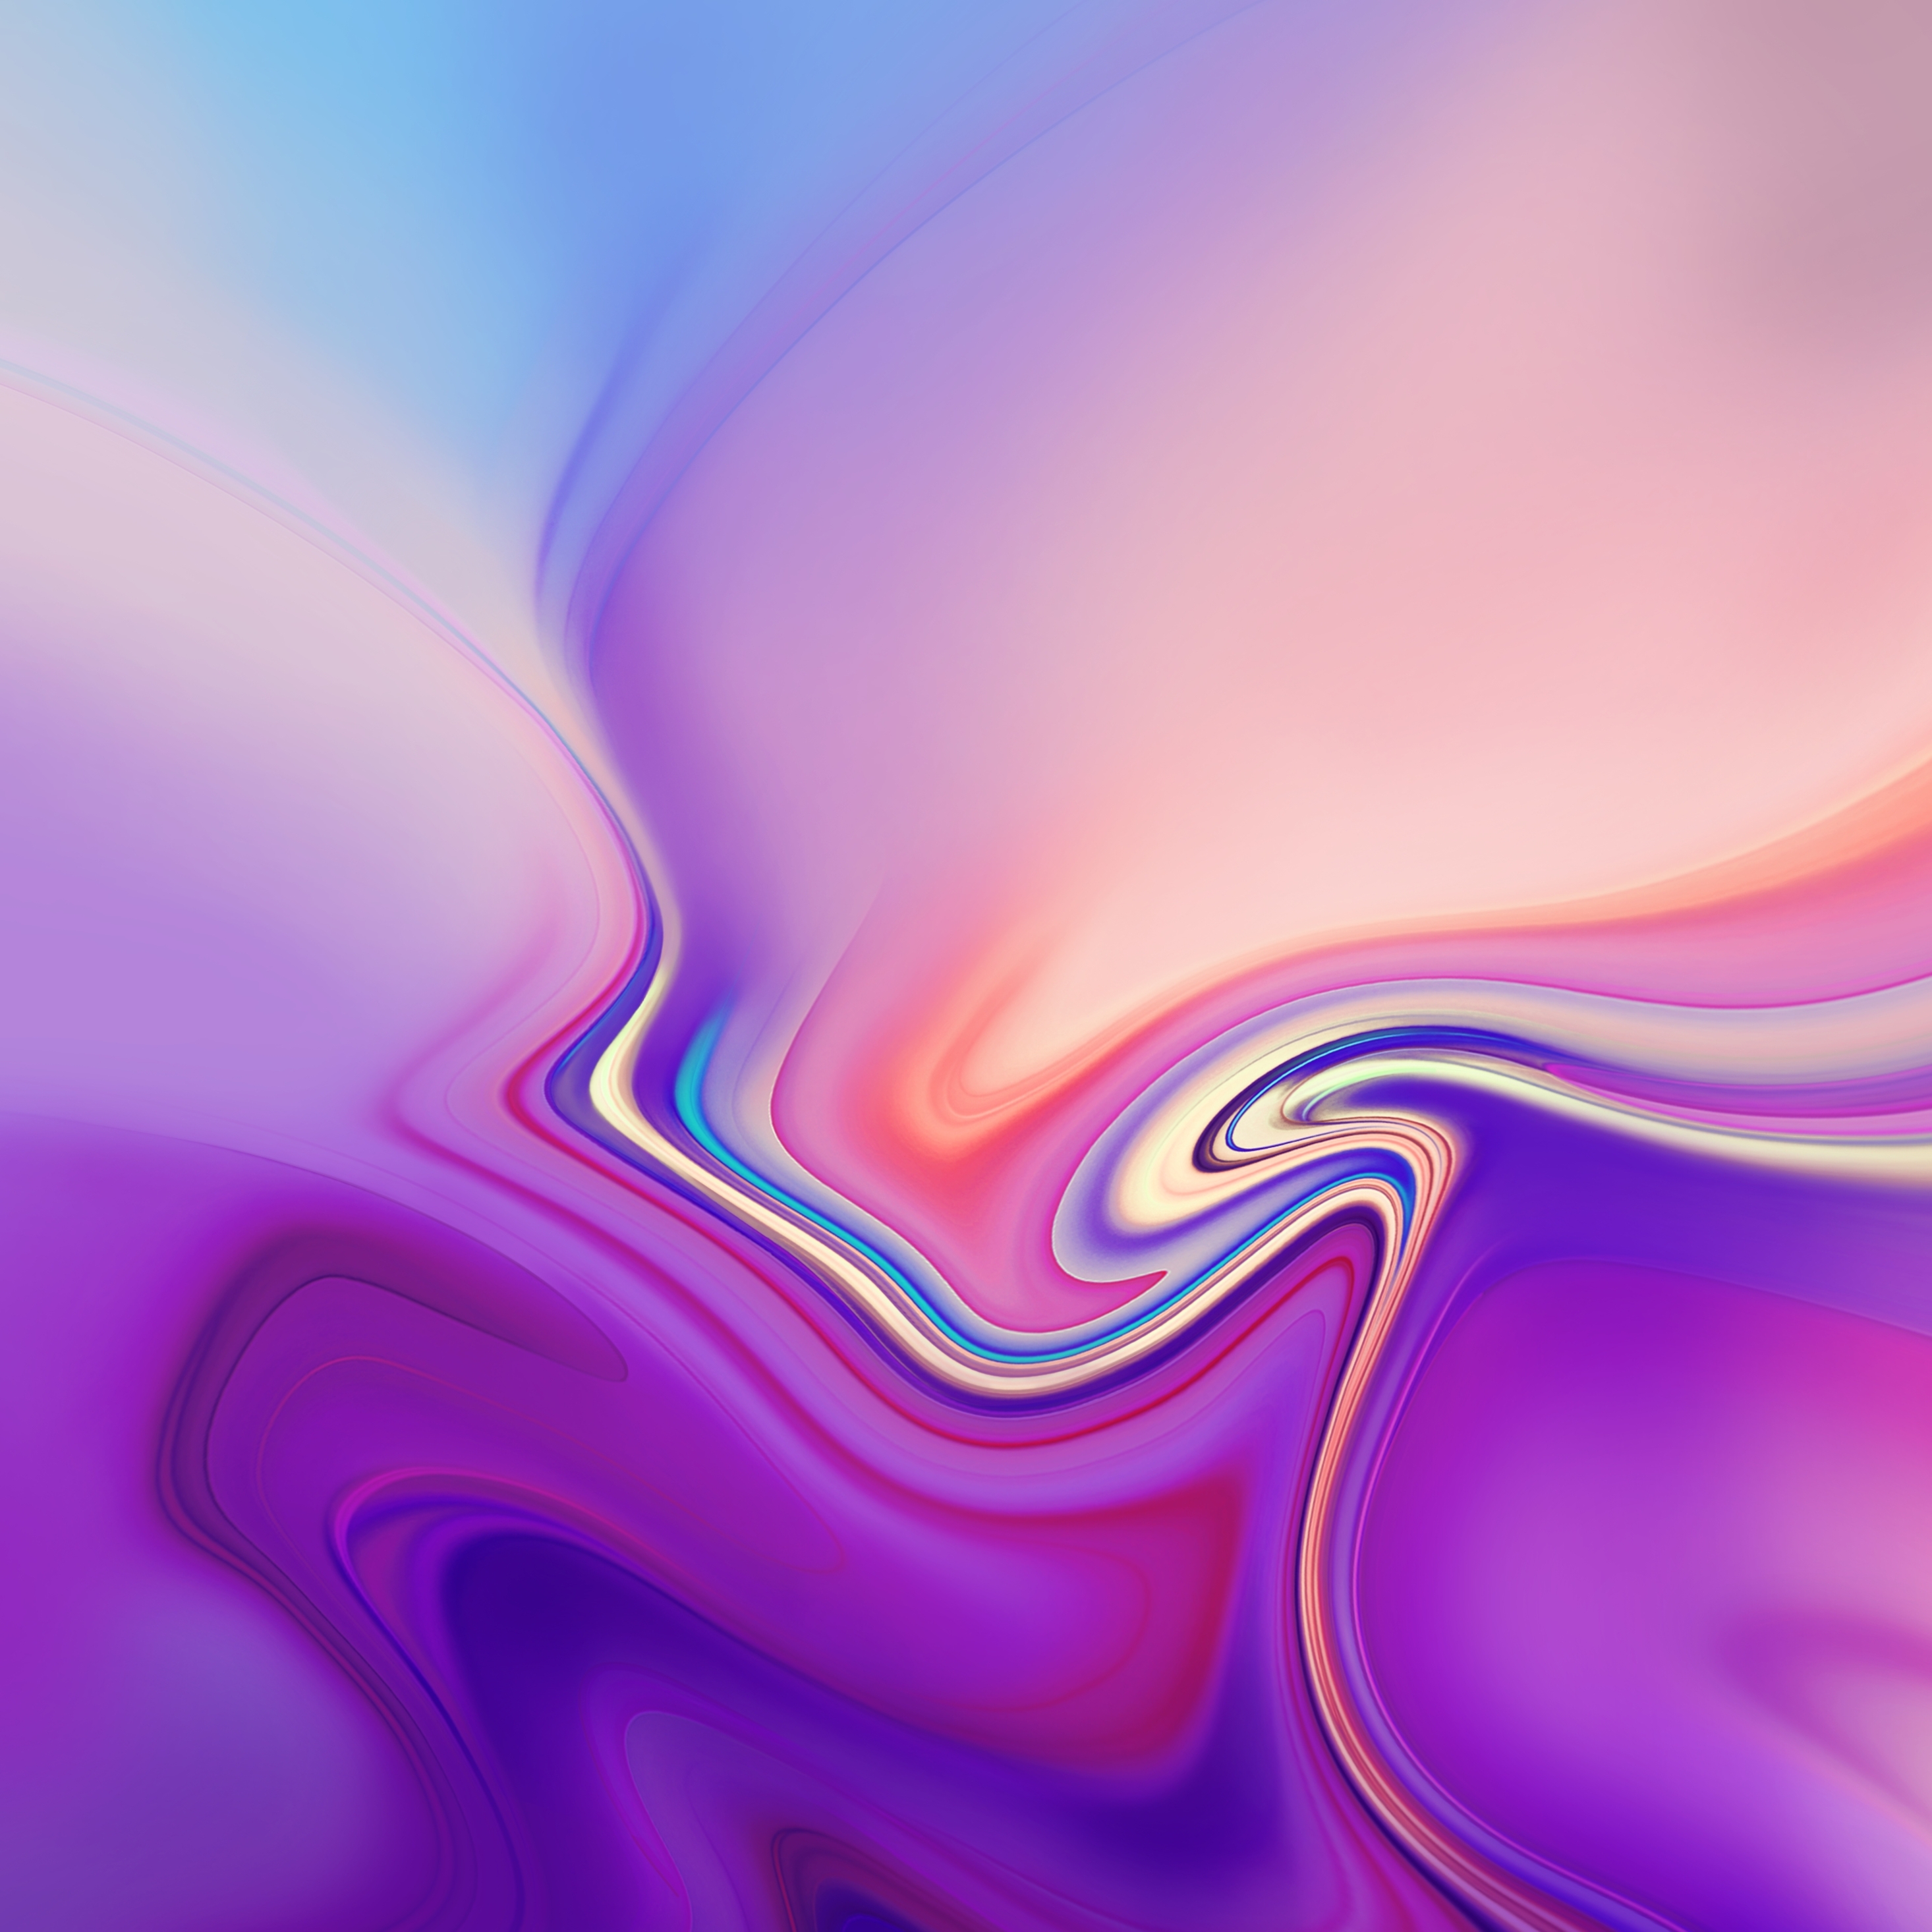 Note 9 4K Wallpapers